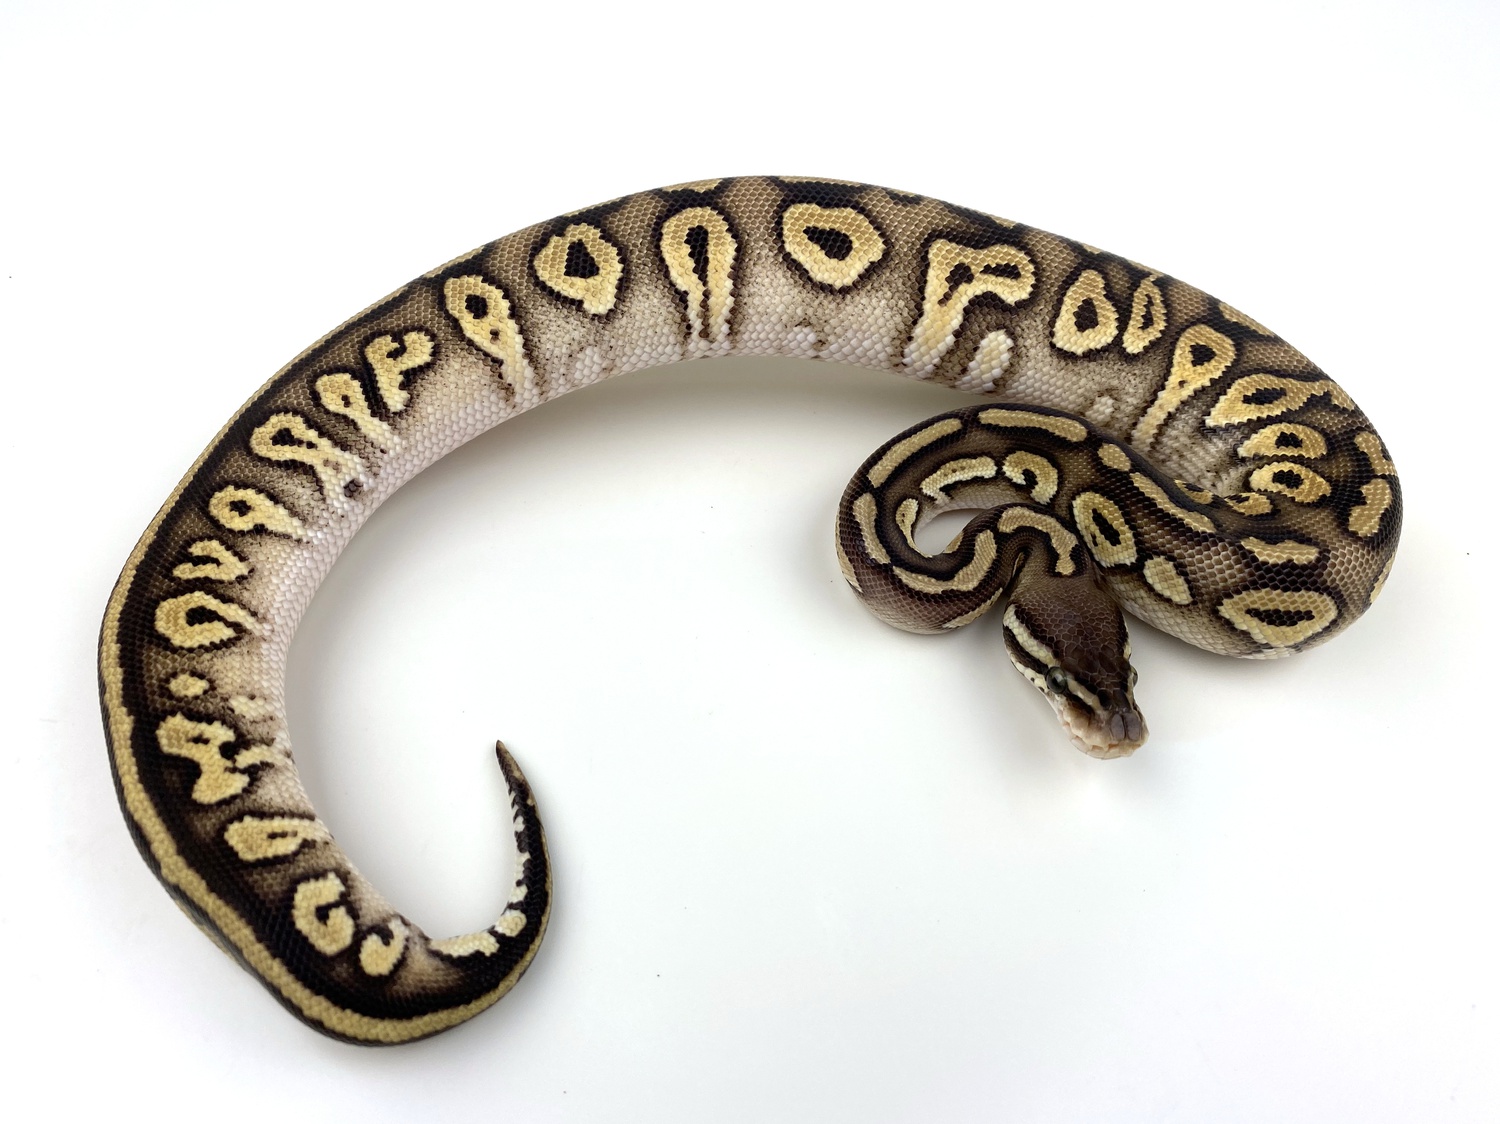 Pastel Mystic Redstripe 100% Het Pied Ball Python by Royal Constrictor Designs